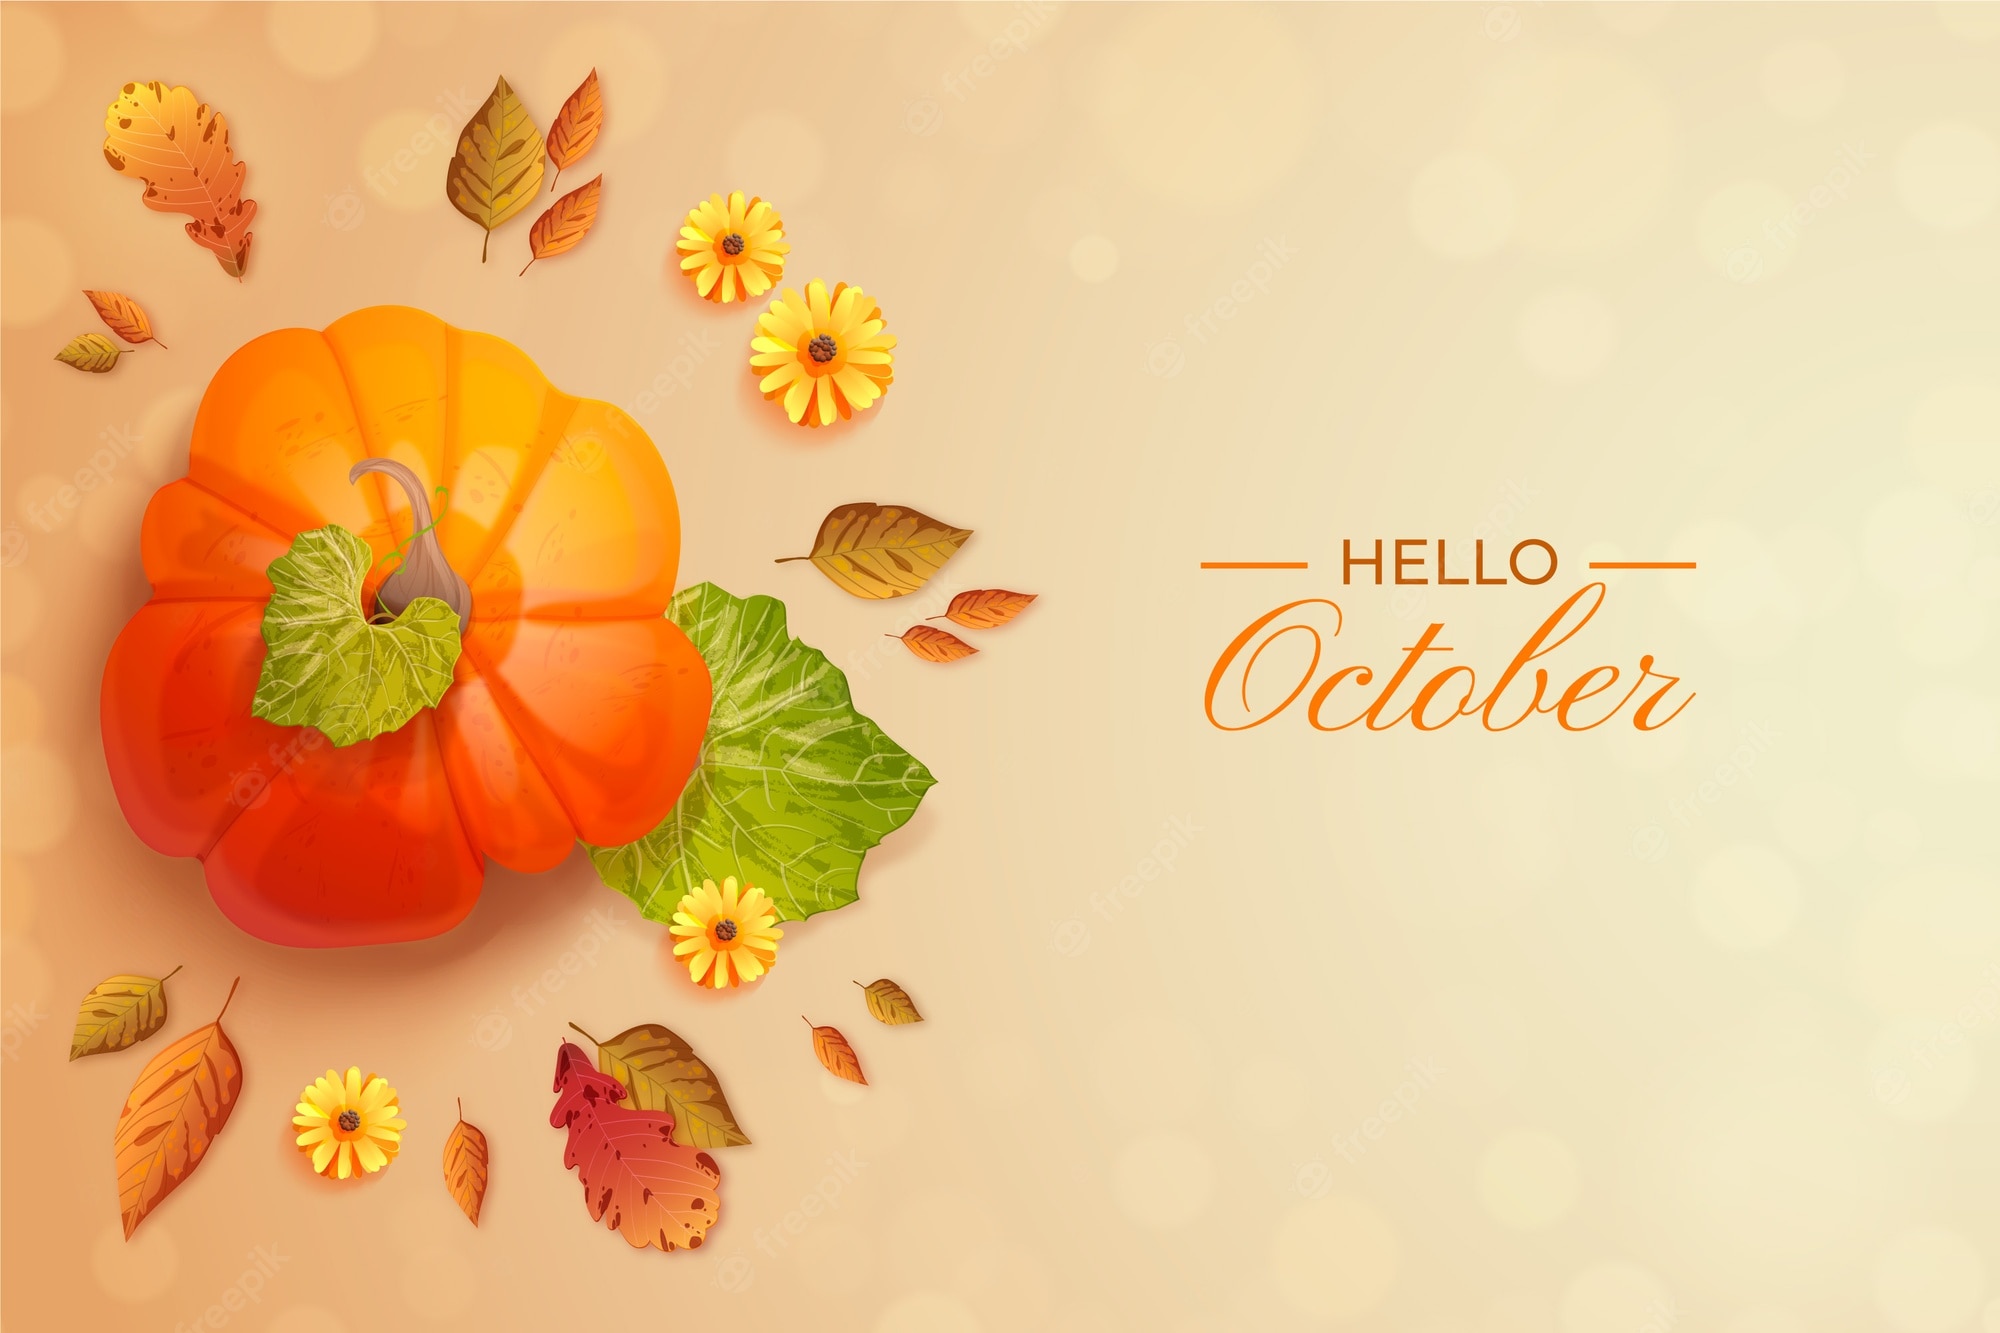 HAPPY NEW MONTH OF OCTOBER